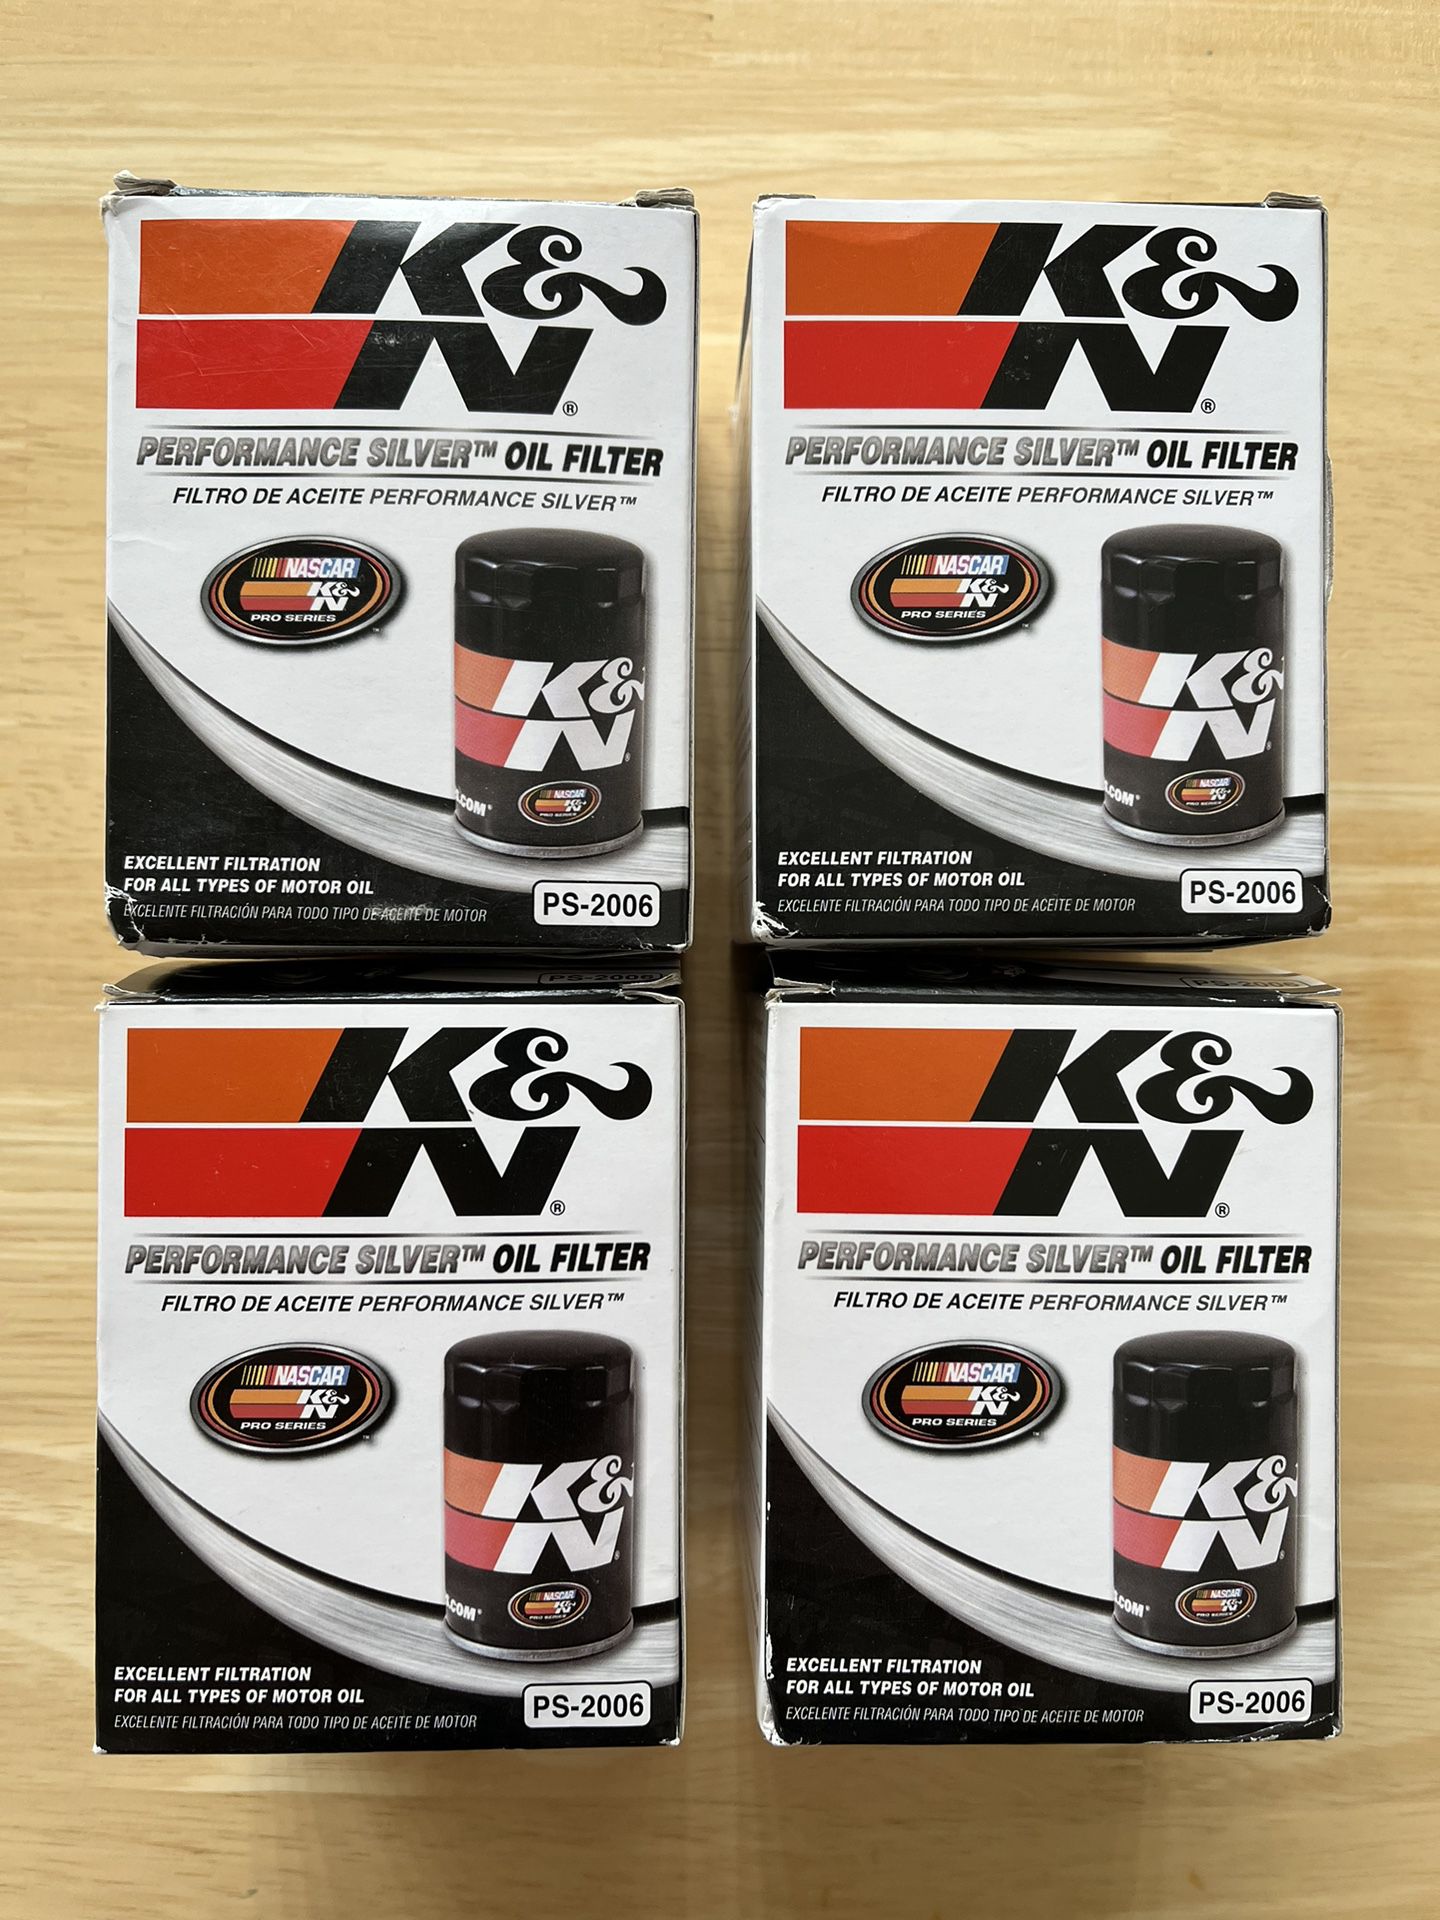 K&N Performance Silver Oil Filter PS-2006 Chevy GMC